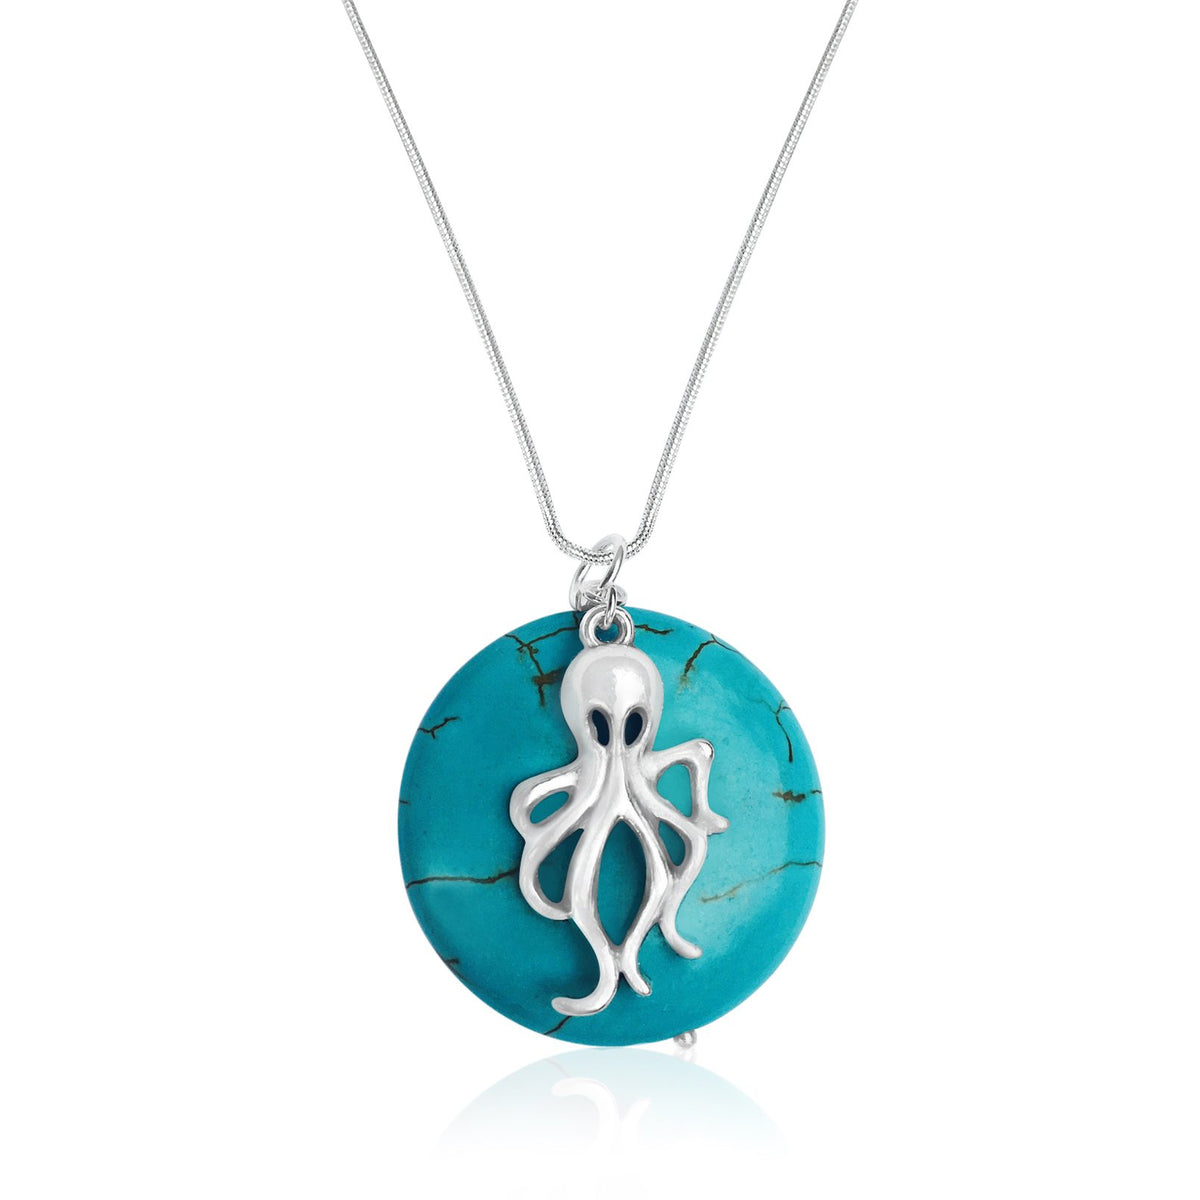 Turquoise Round Pendant with Octopus on Silver Necklace